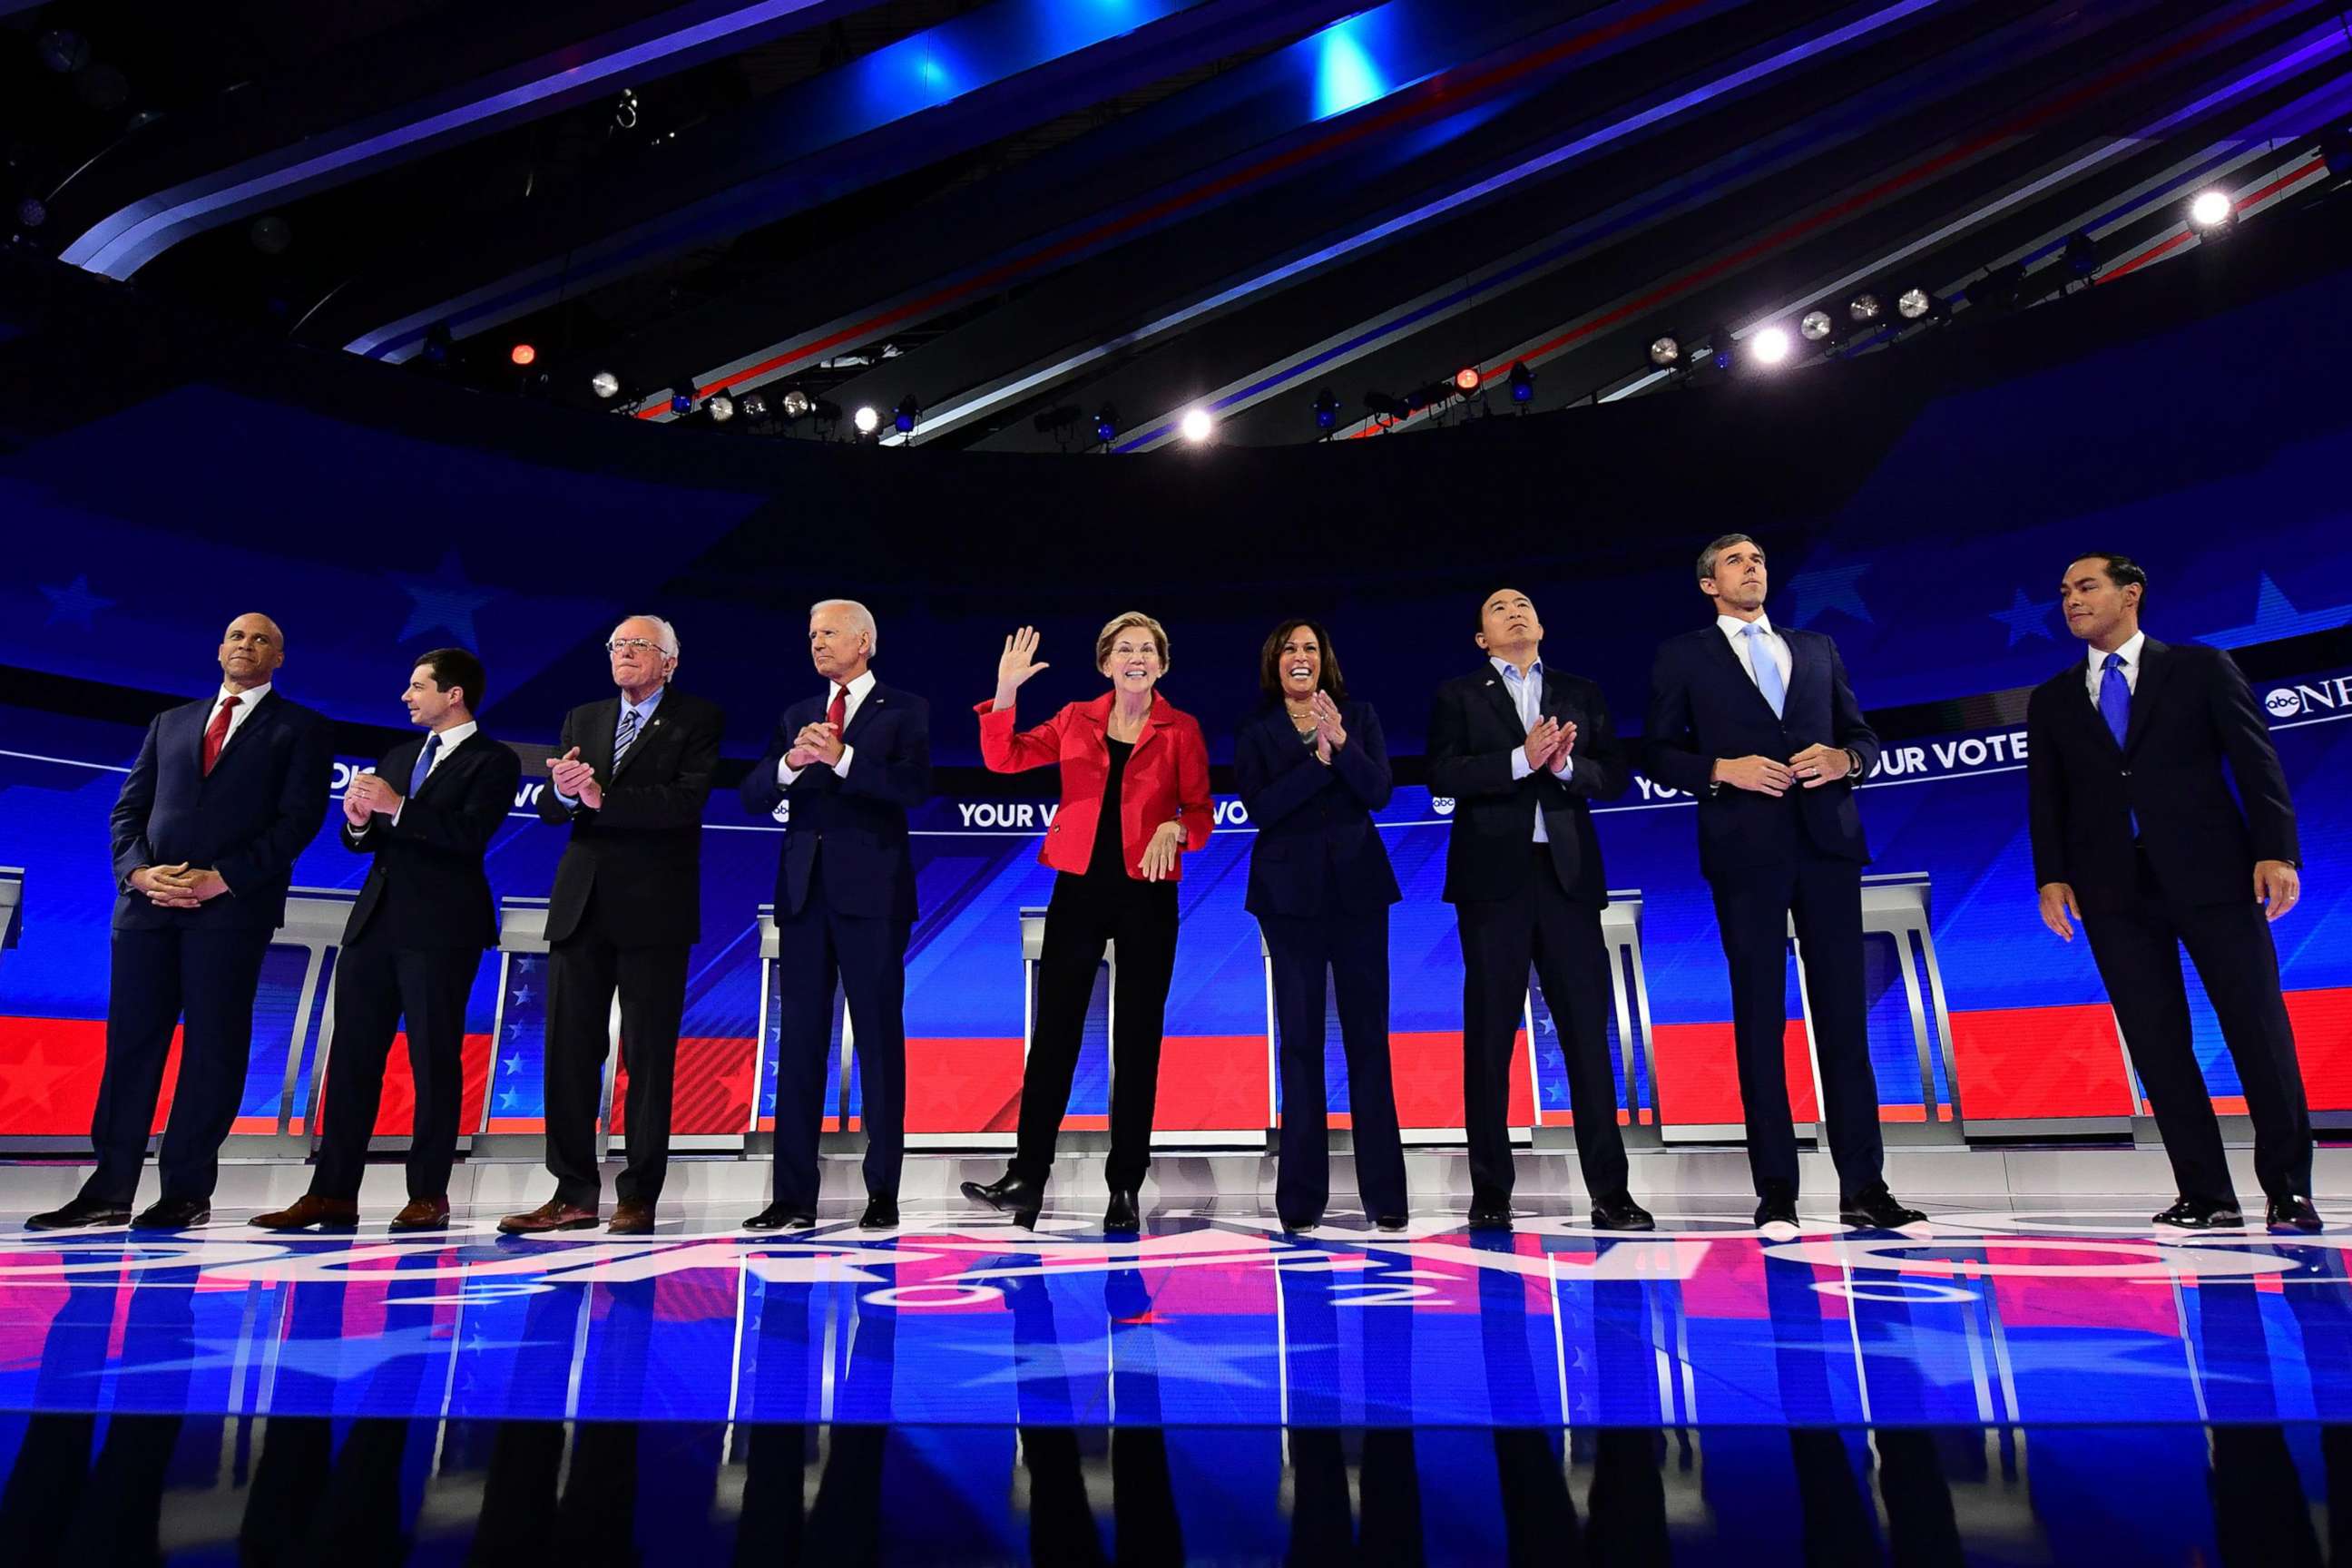 PHOTO: Democratic presidential hopefuls stand onstage ahead of the third Democratic primary debate of the 2020 presidential campaign season hosted by ABC News in partnership with Univision at Texas Southern University in Houston on Sept. 12, 2019. 